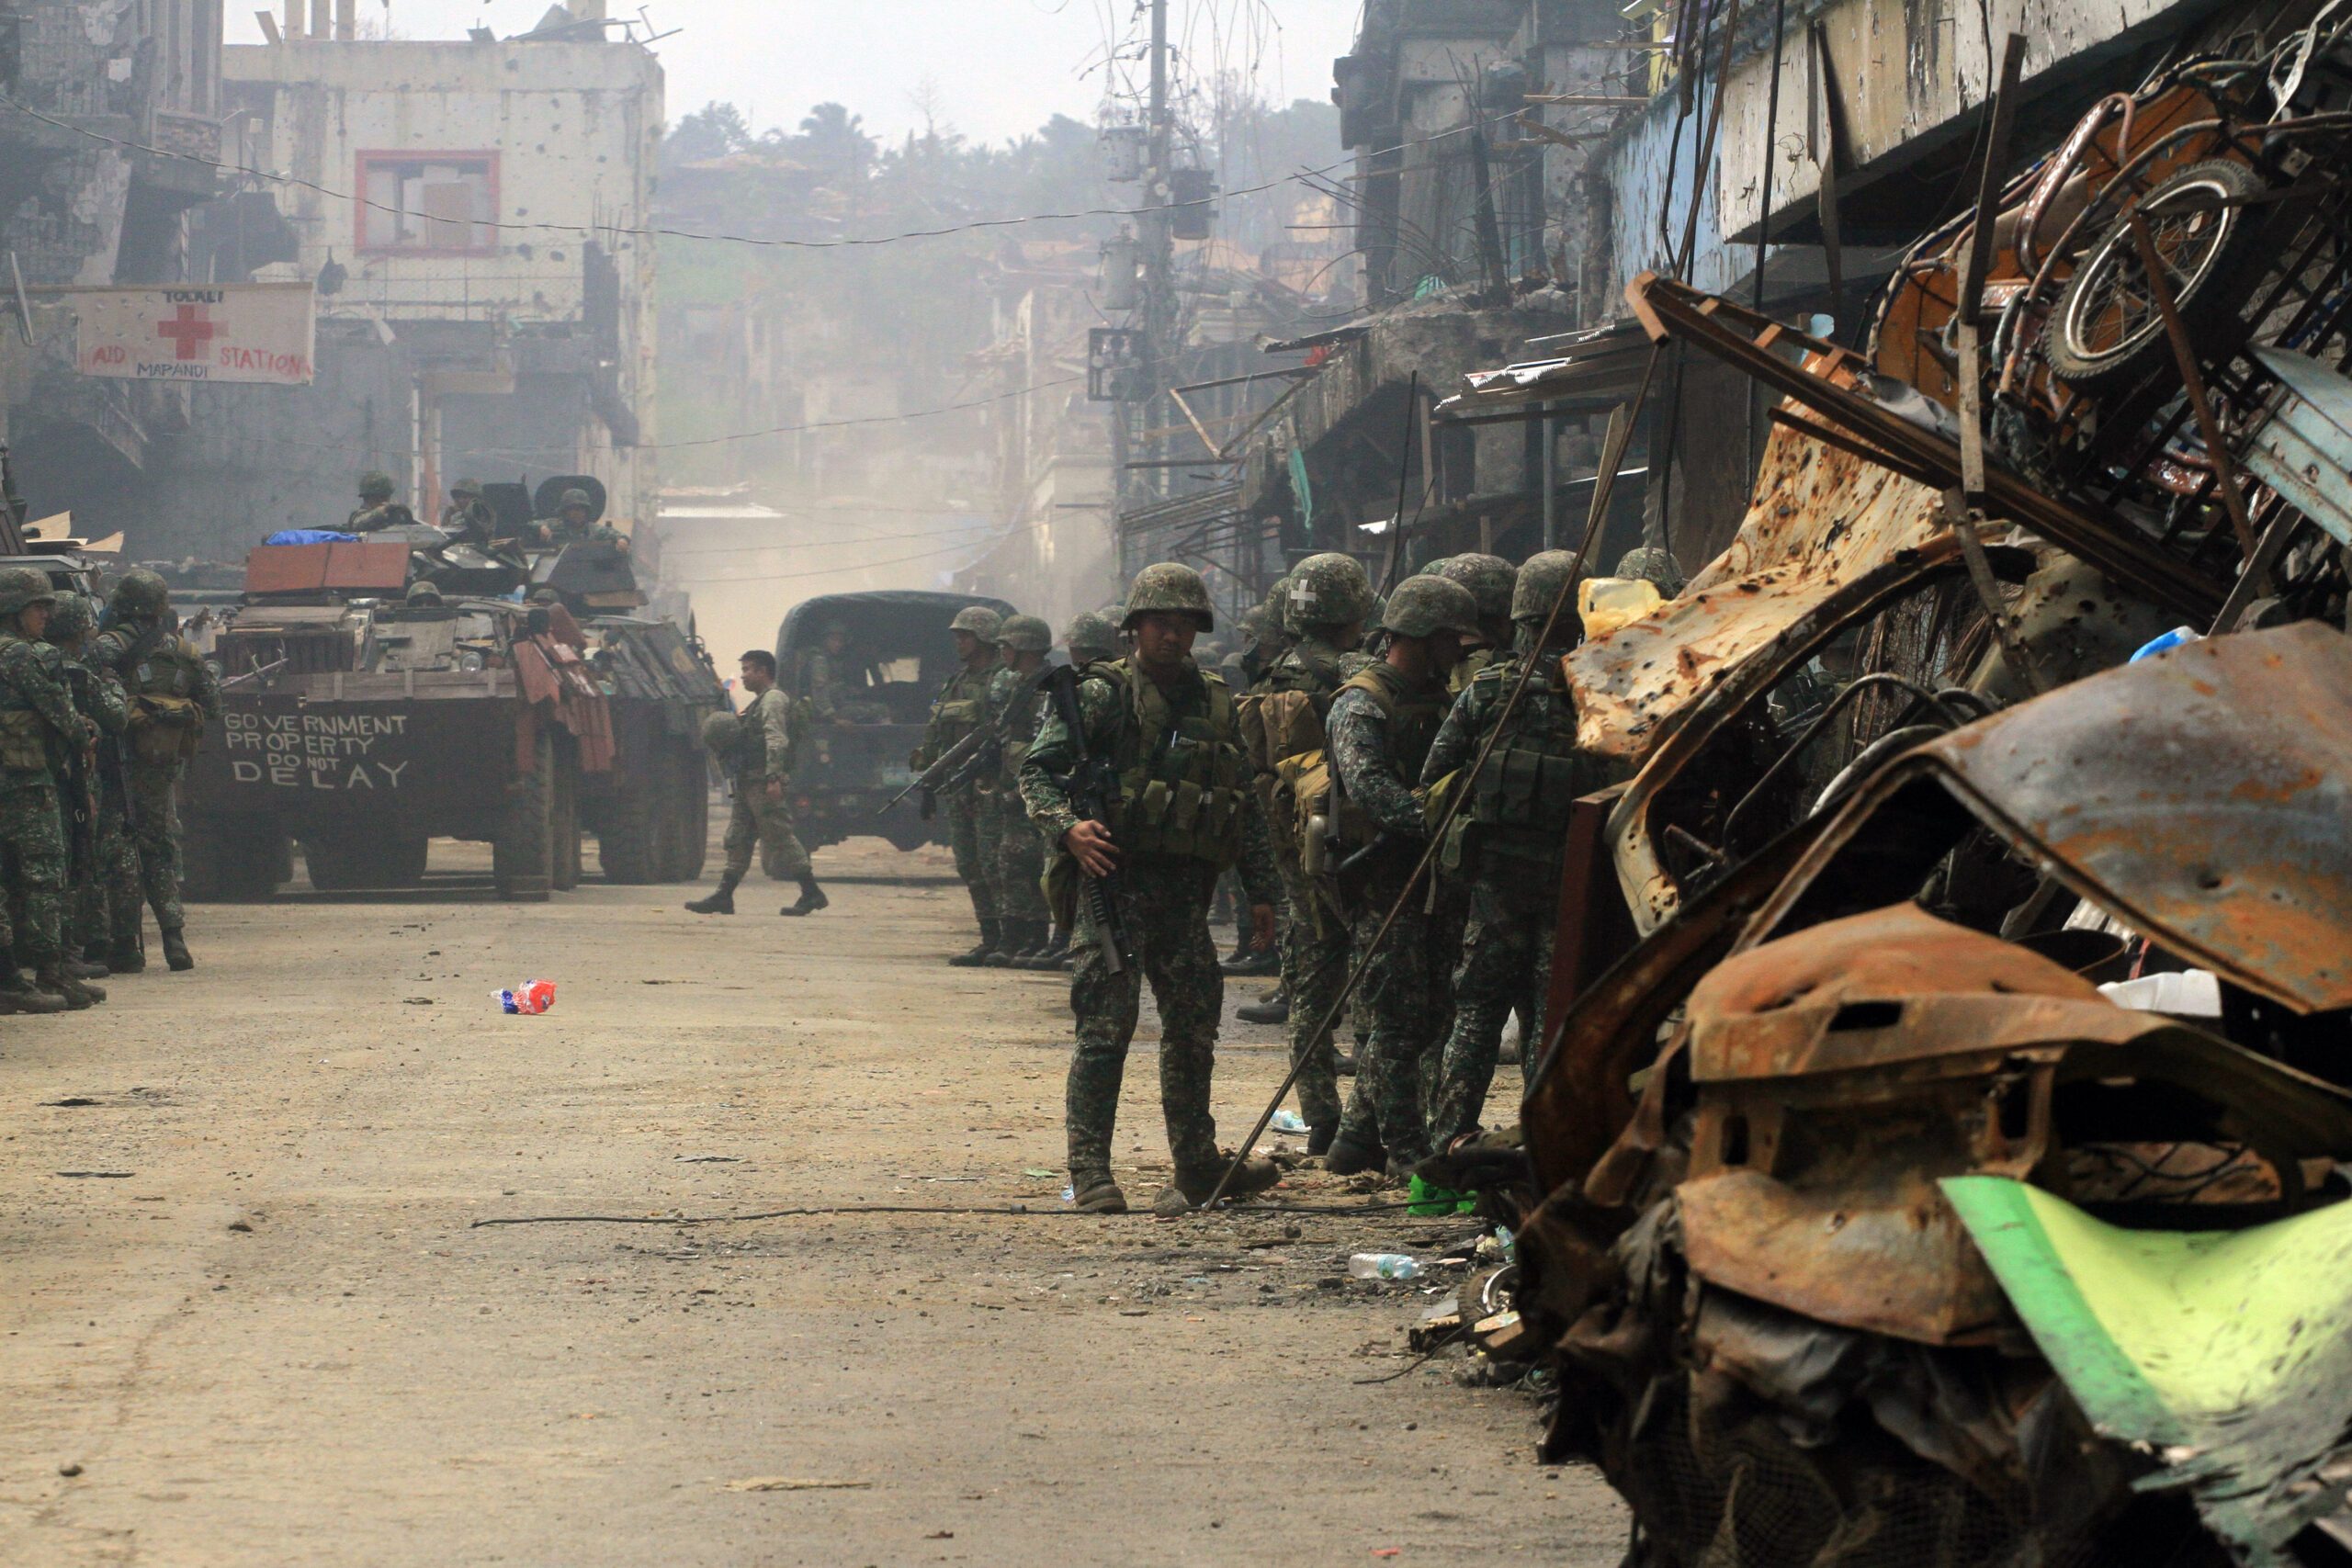 Bodies, firearms retrieved from former Maute stronghold